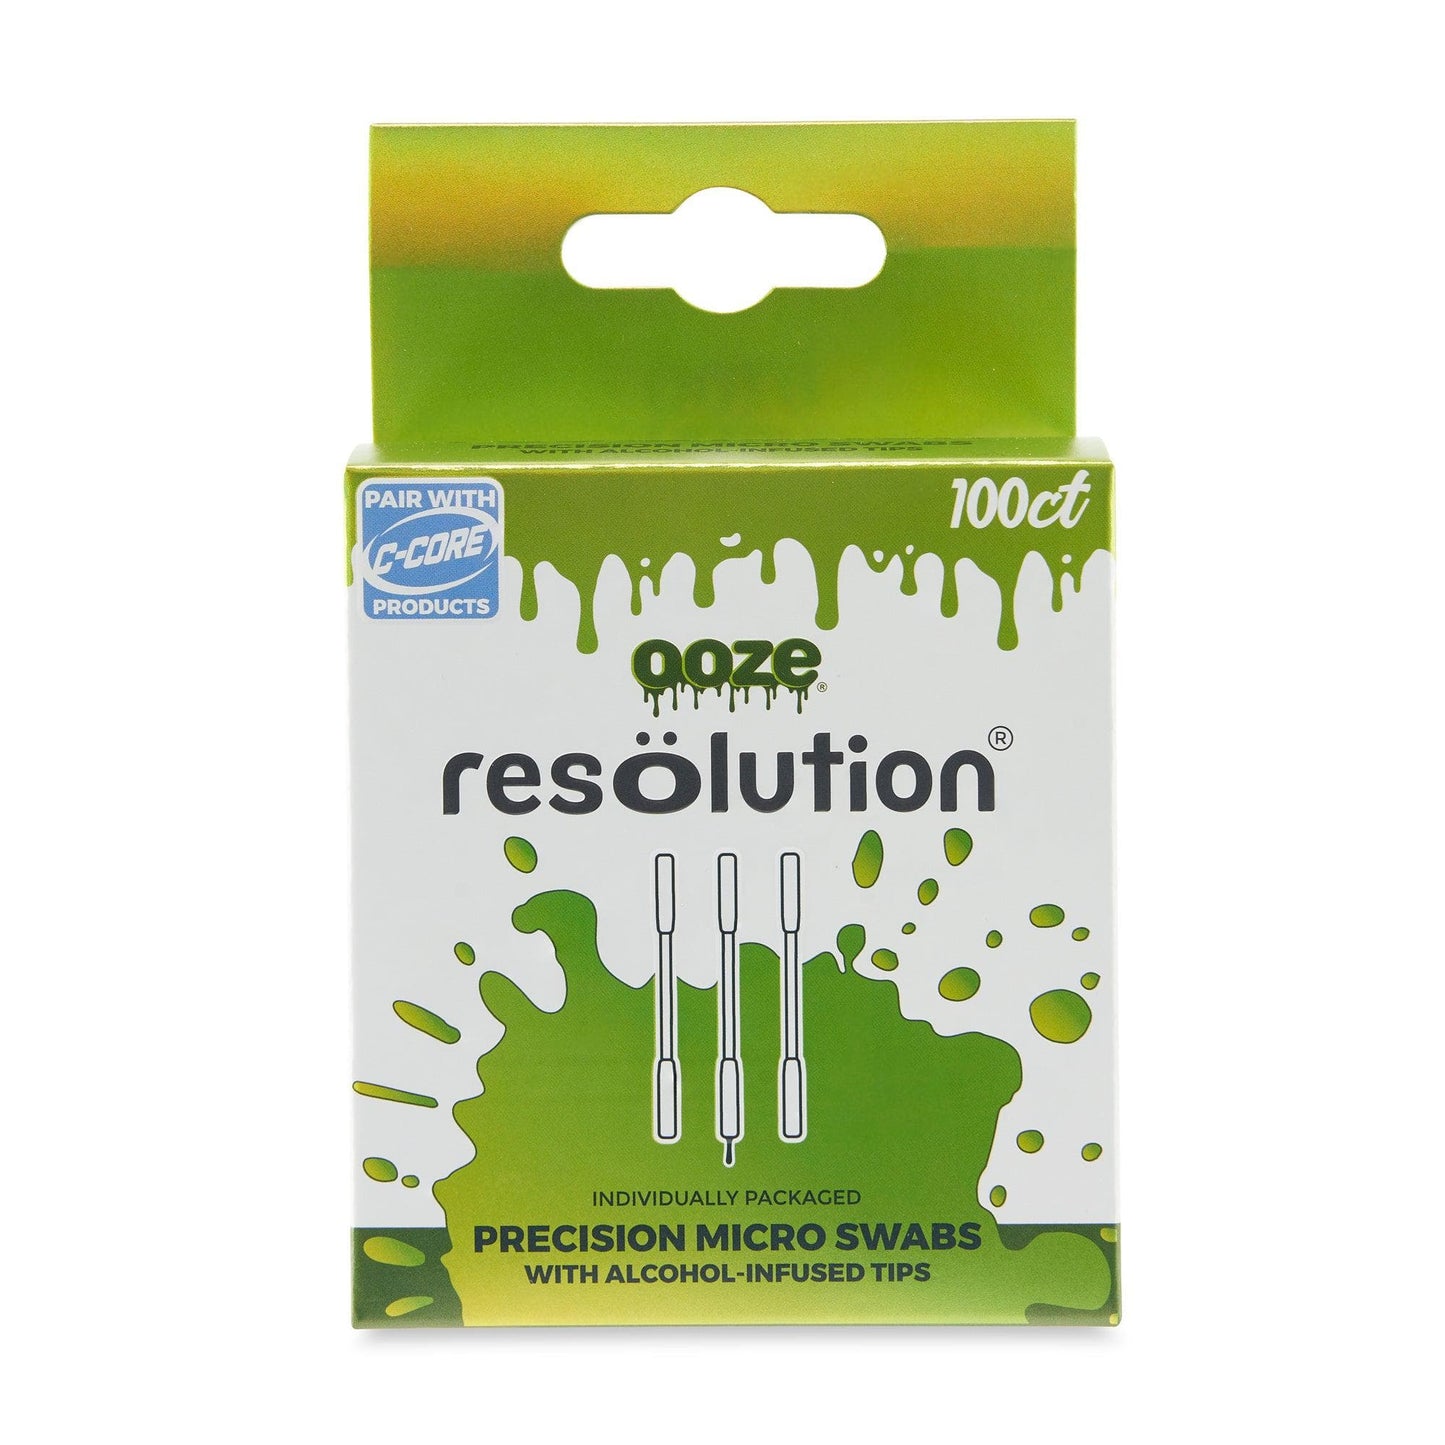 Ooze Resolution Cleaning Products Ooze Resolution Alcohol Micro Swabs – 100ct